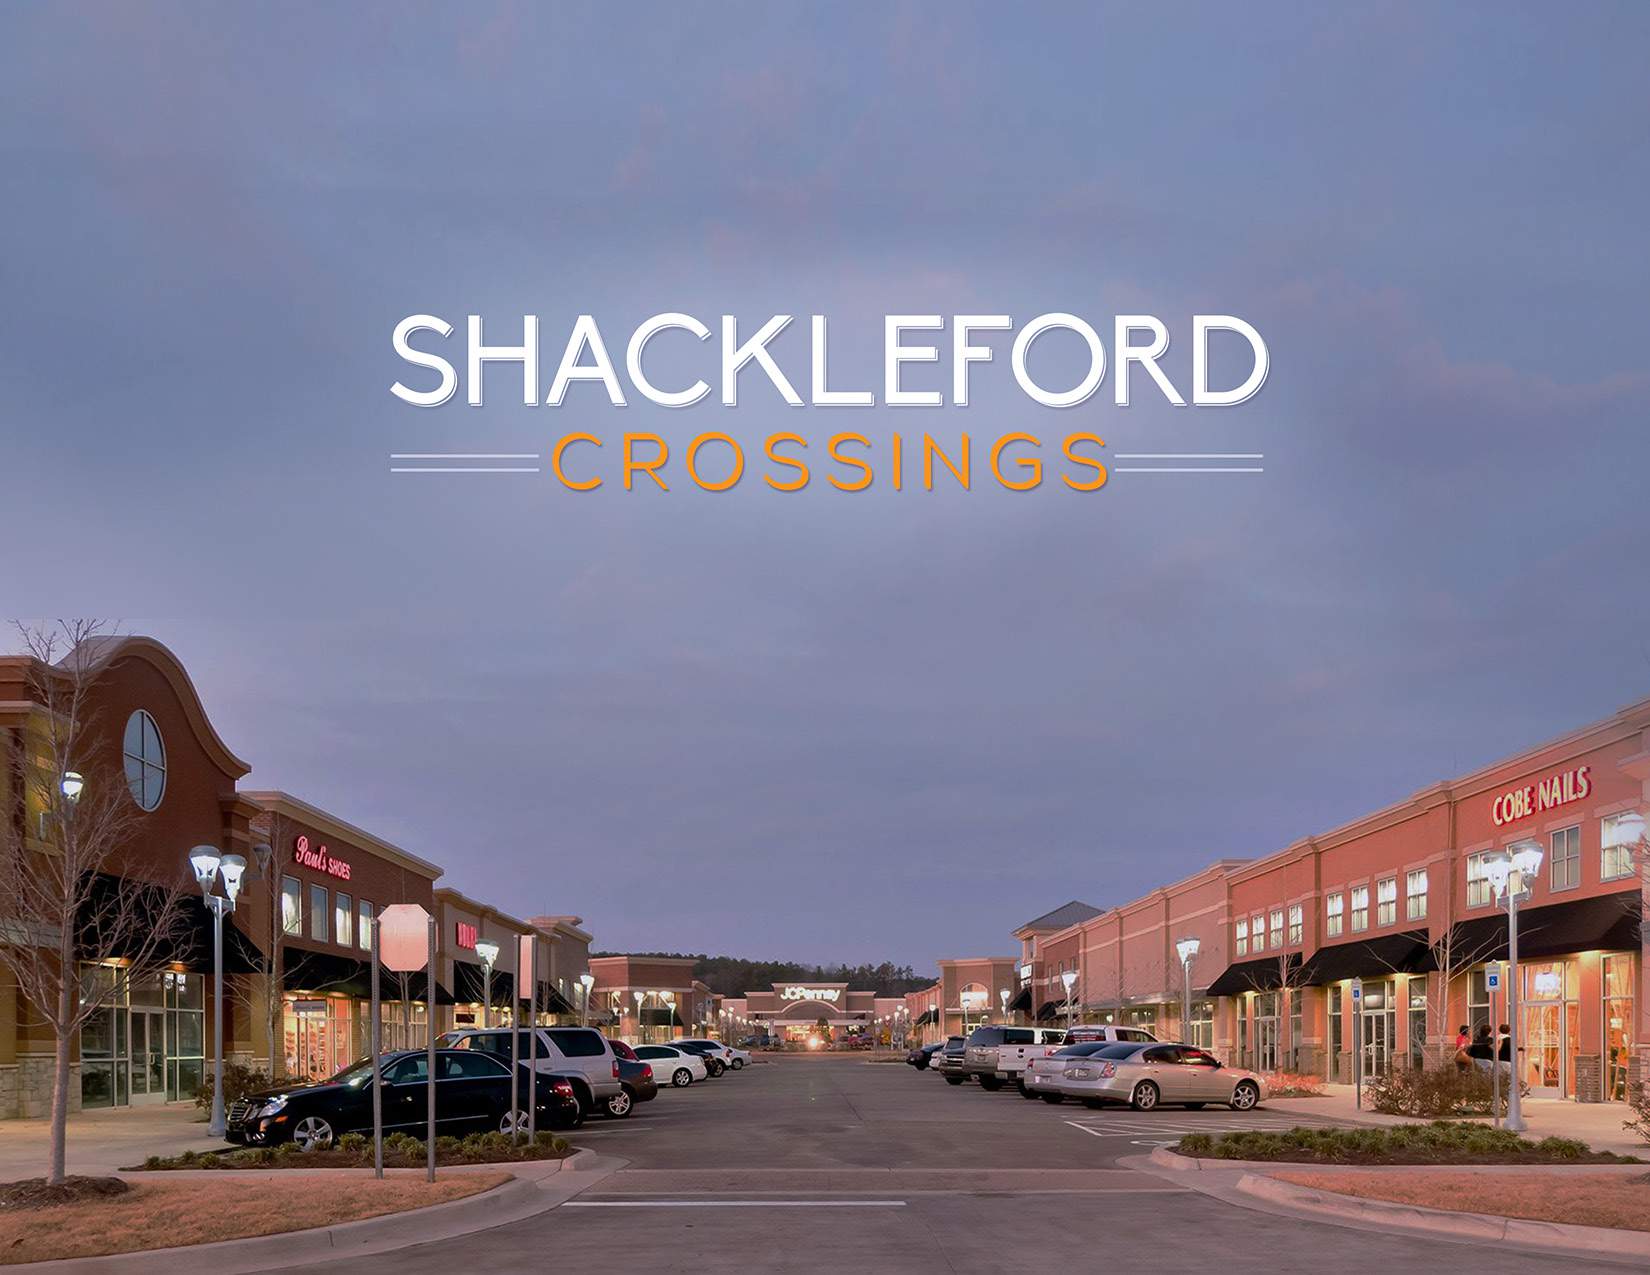 3 Reasons Shackleford Crossings Is The Best Place For Your Business Image